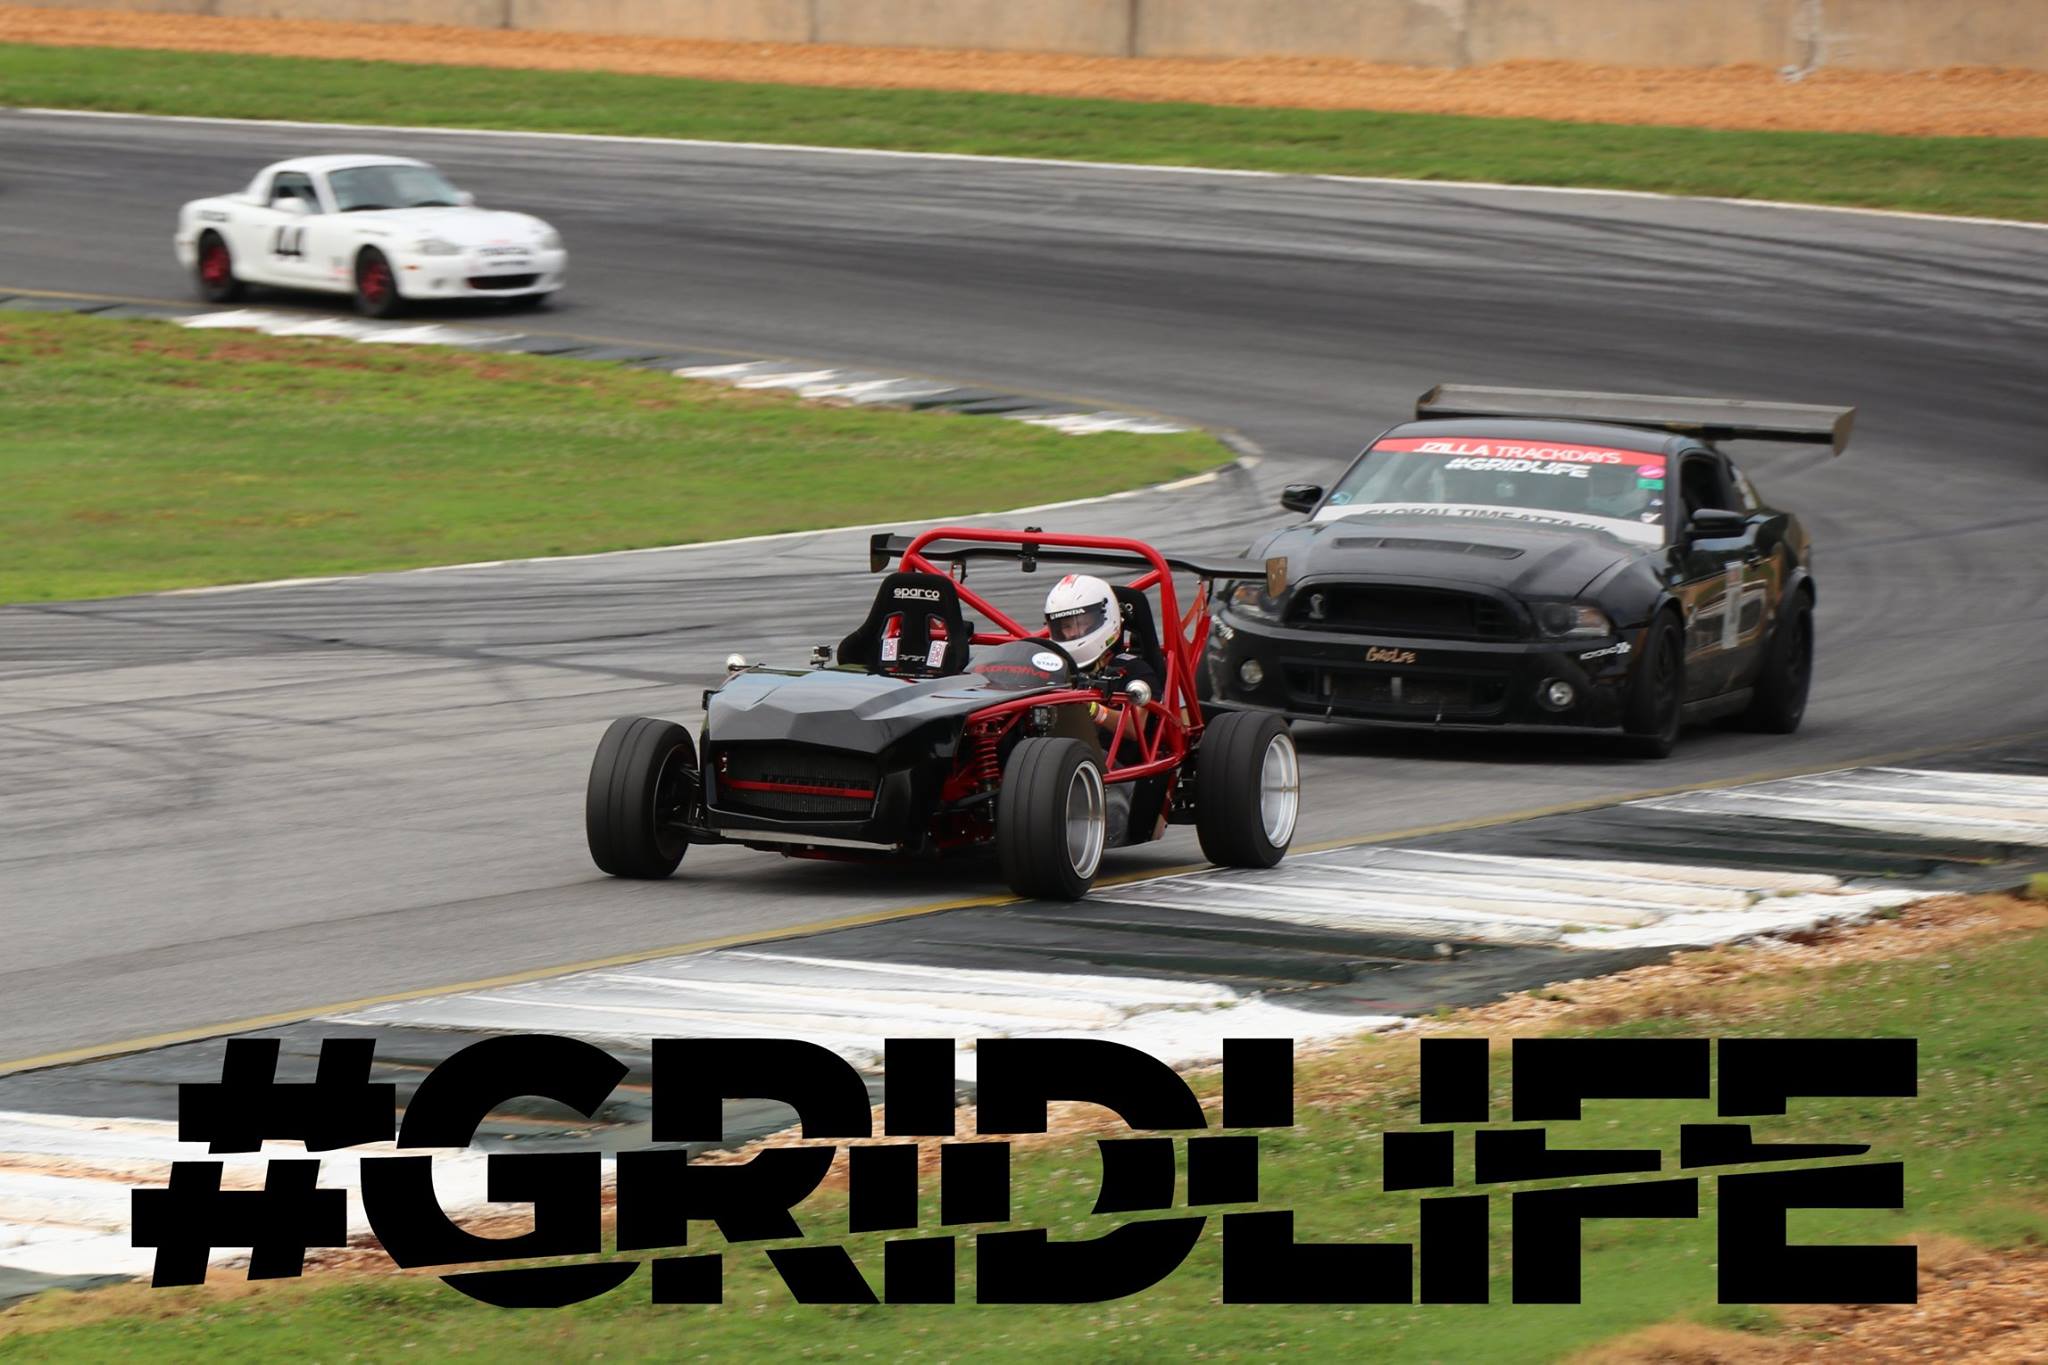 Get ready for Gridlife South!